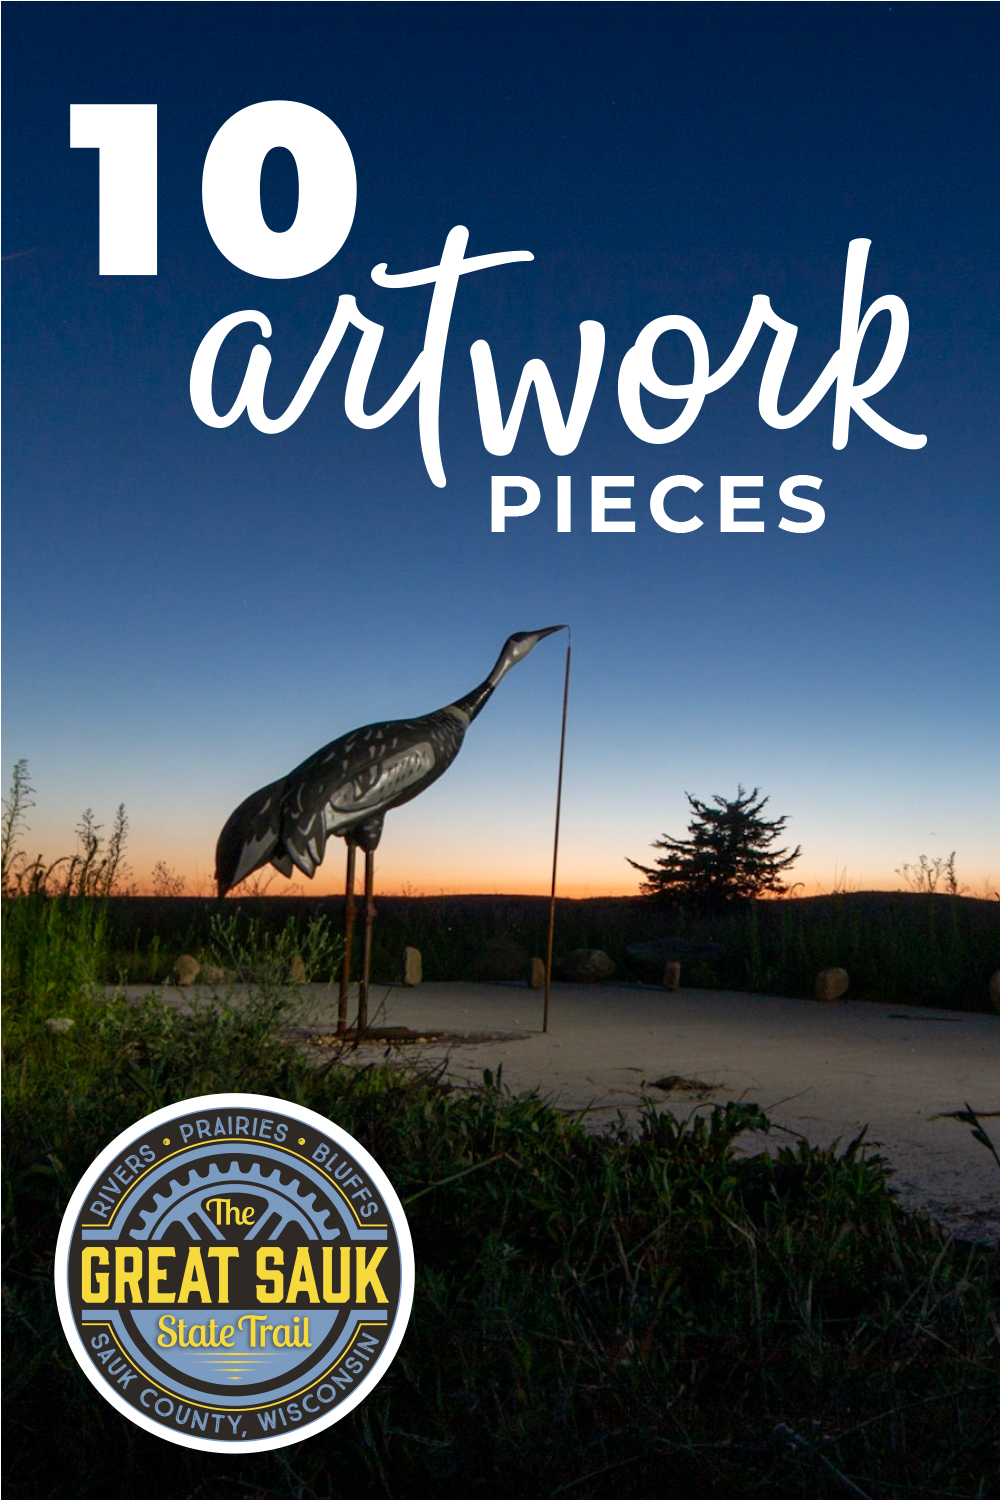 Image for Art on the Great Sauk State Trail!